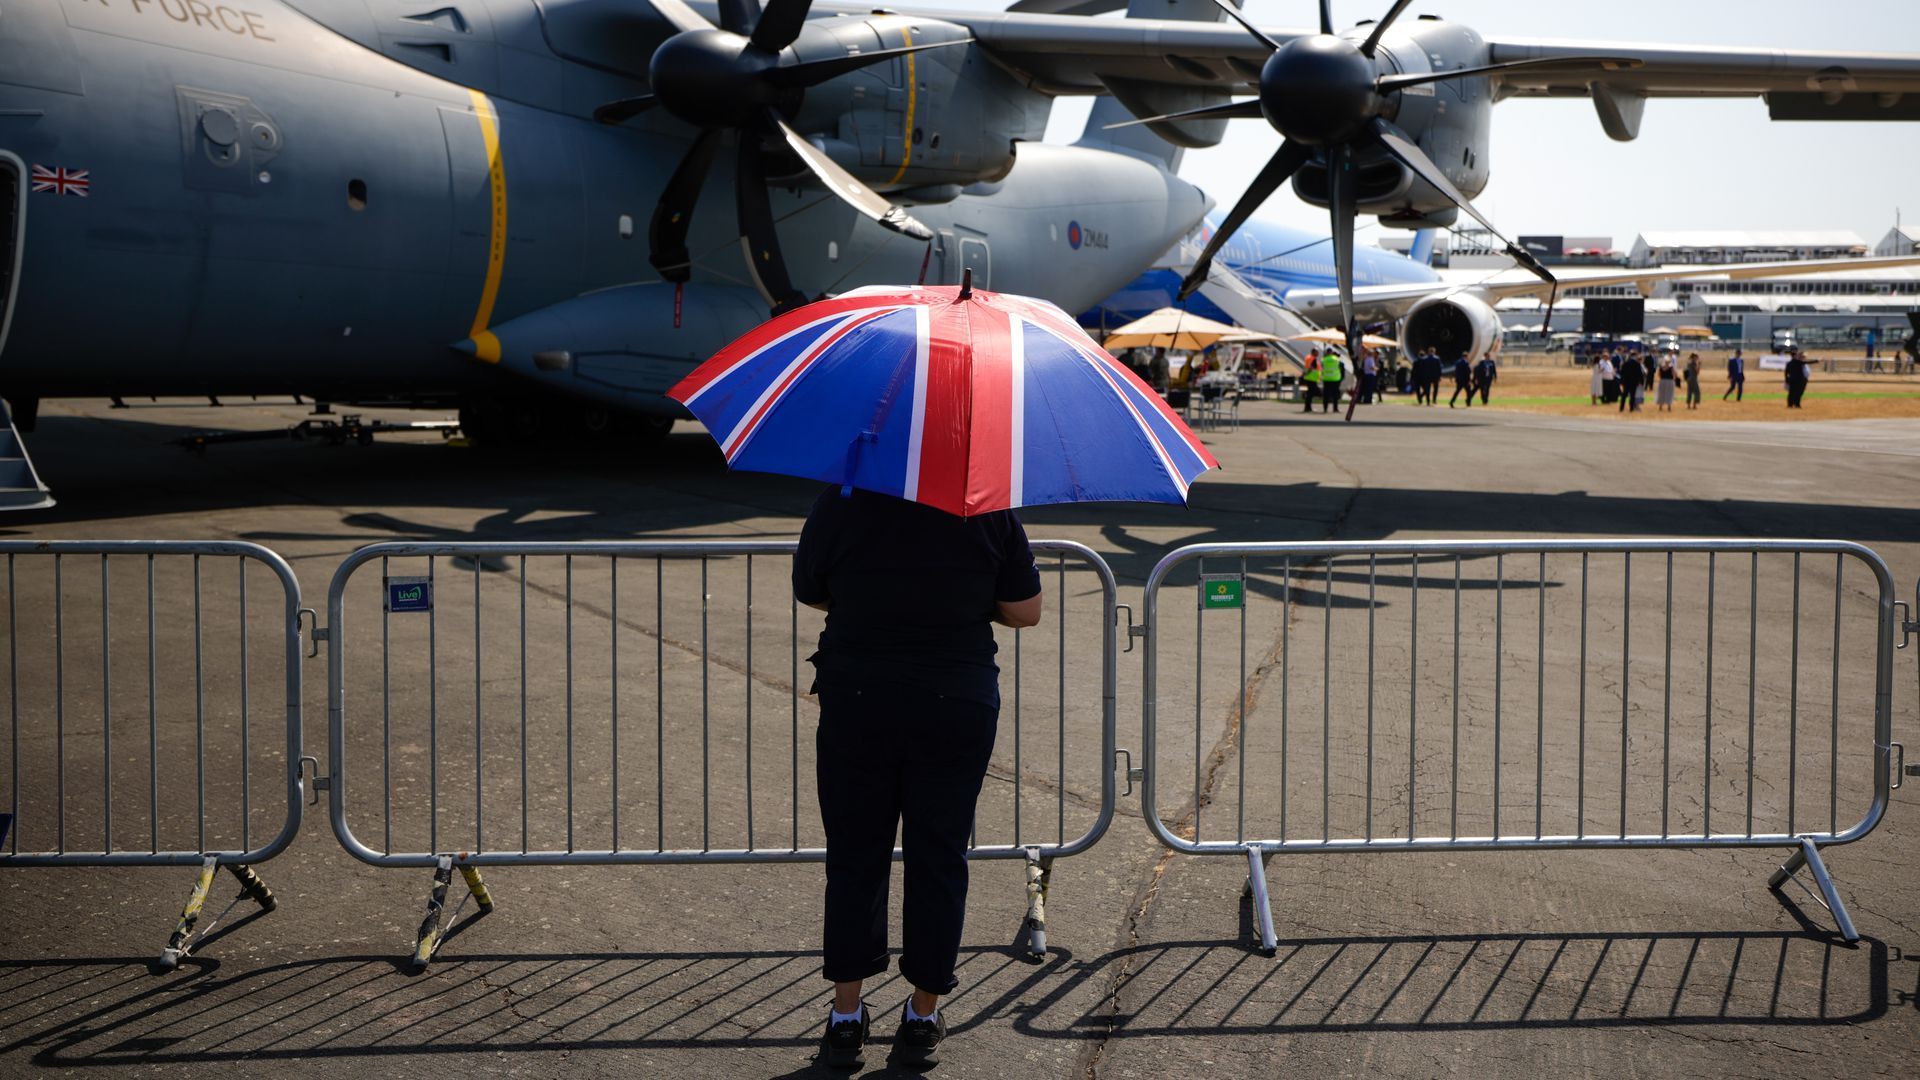 An attendee shelters from the sun on the opening day of the Farnborough International Airshow in Farnborough, U.K., on Monday, July 18, 2022.